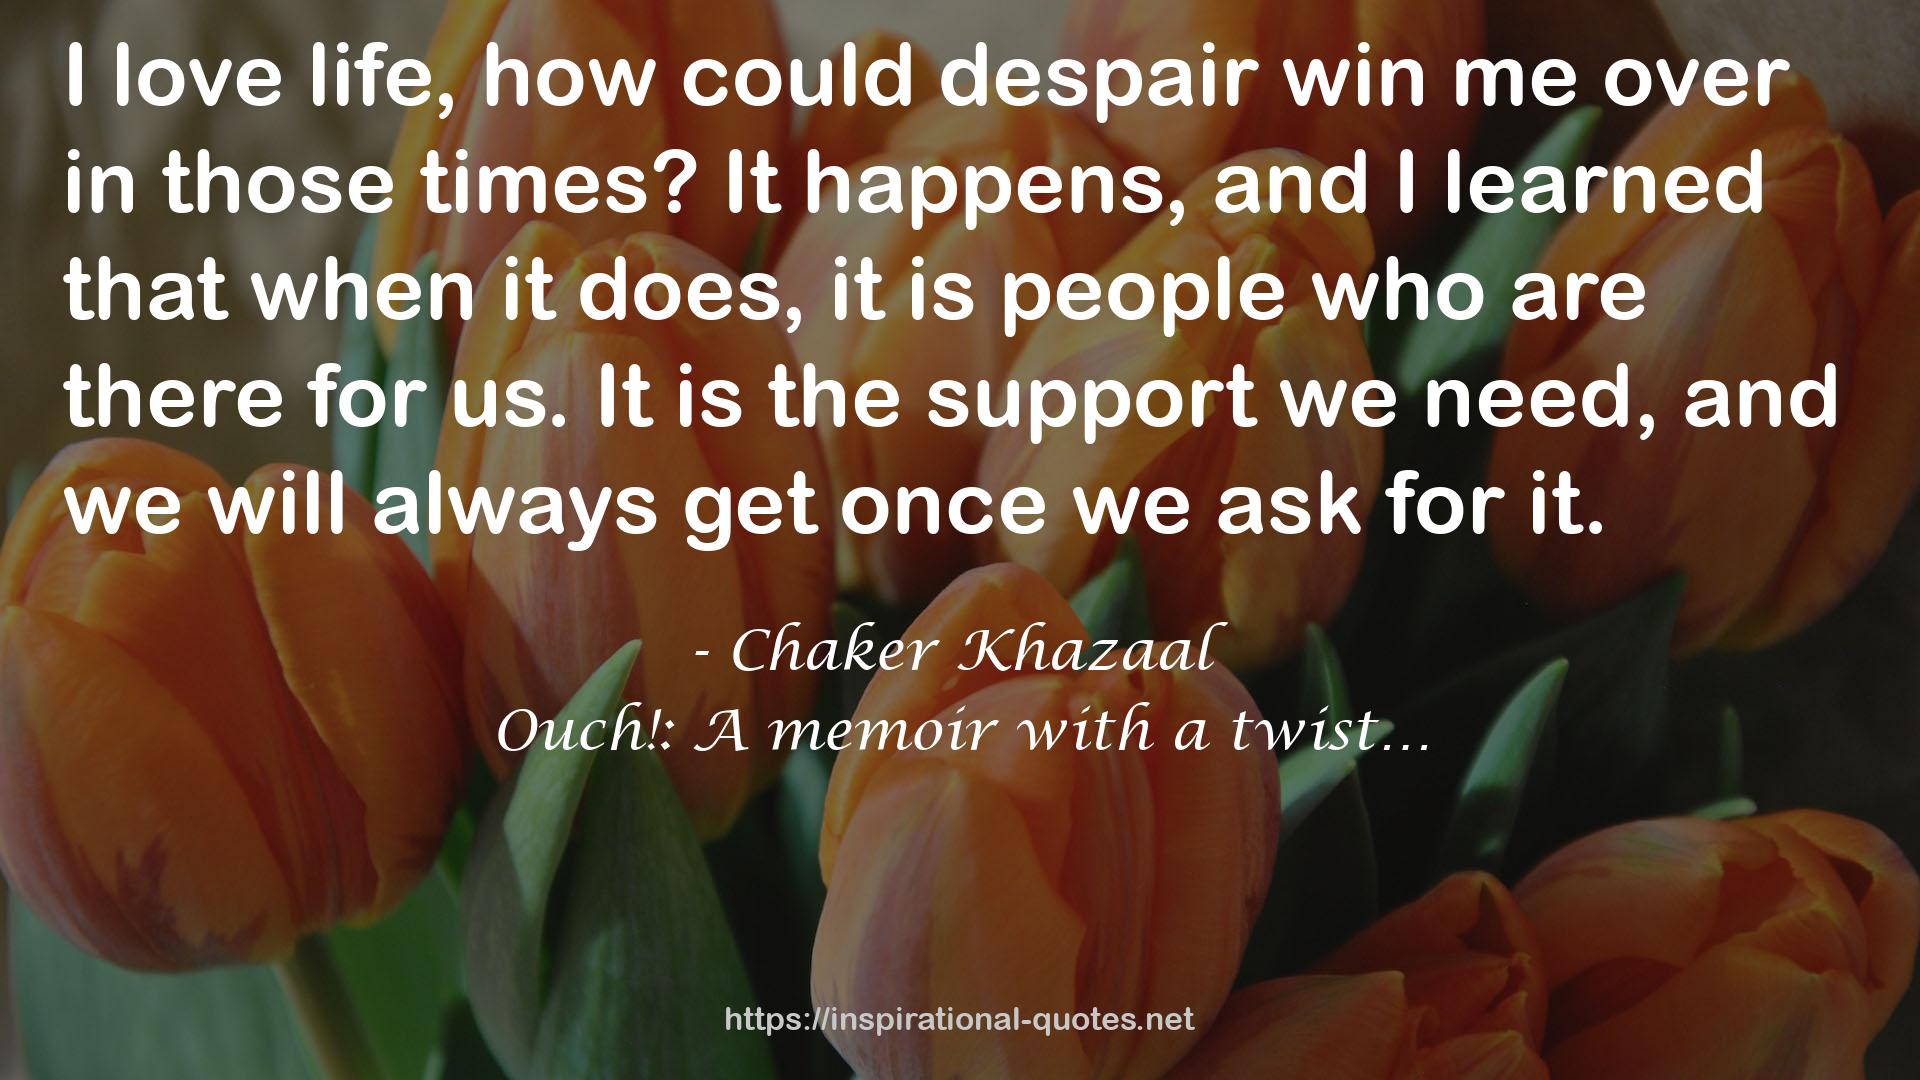 Chaker Khazaal QUOTES